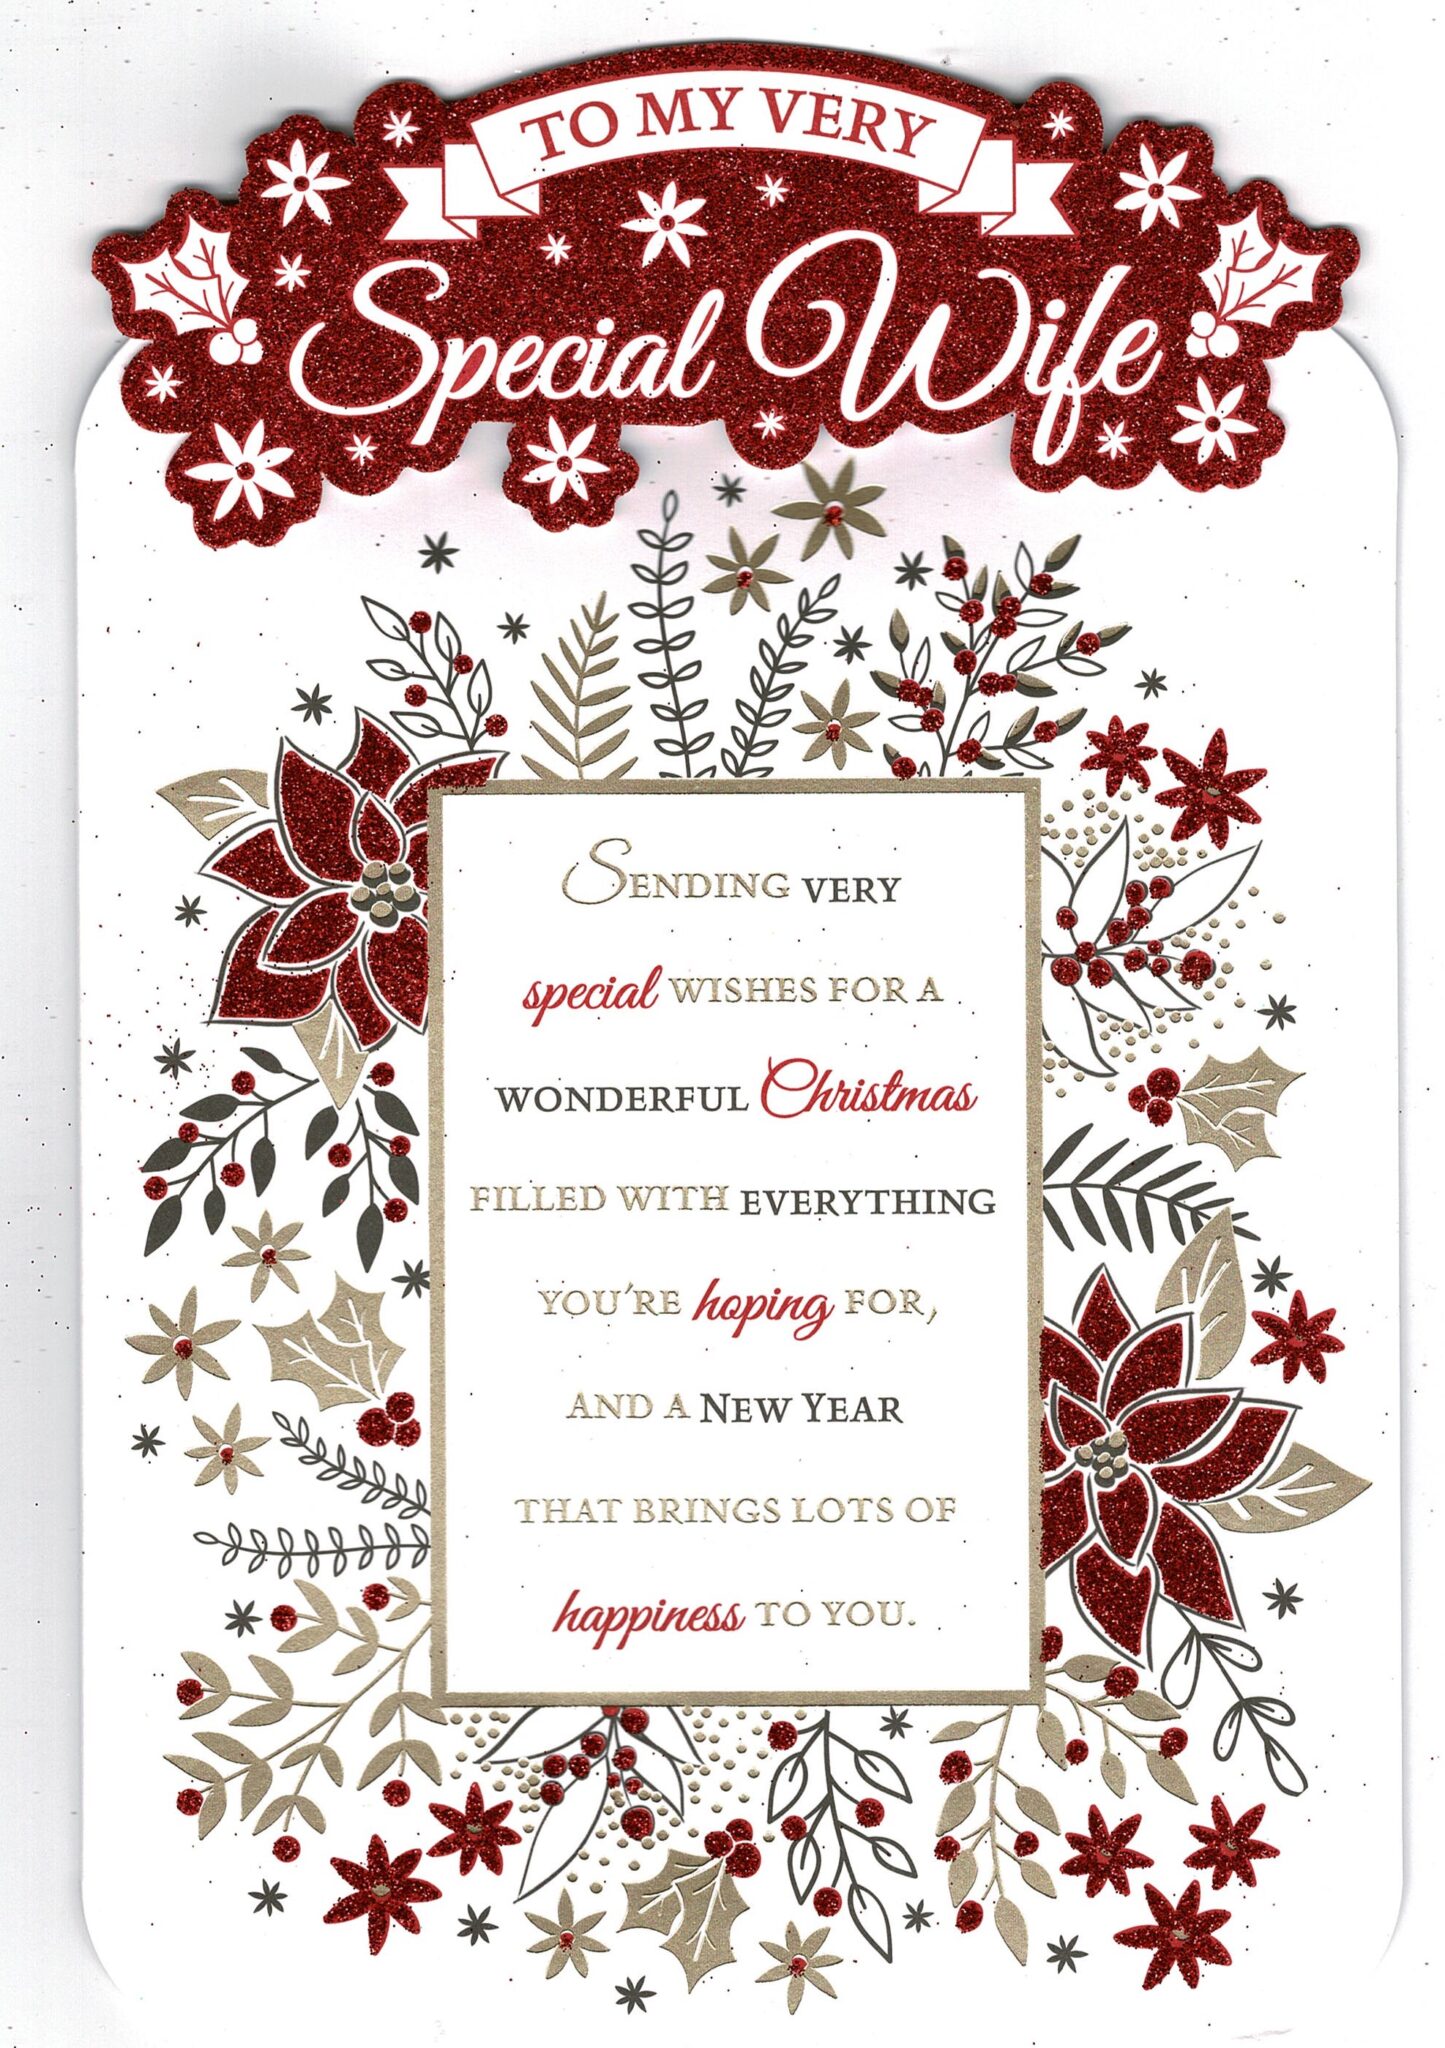 Wife Christmas Card ' To My Very Special Wife ' With Festive Sentiment Verse - With Love Gifts 